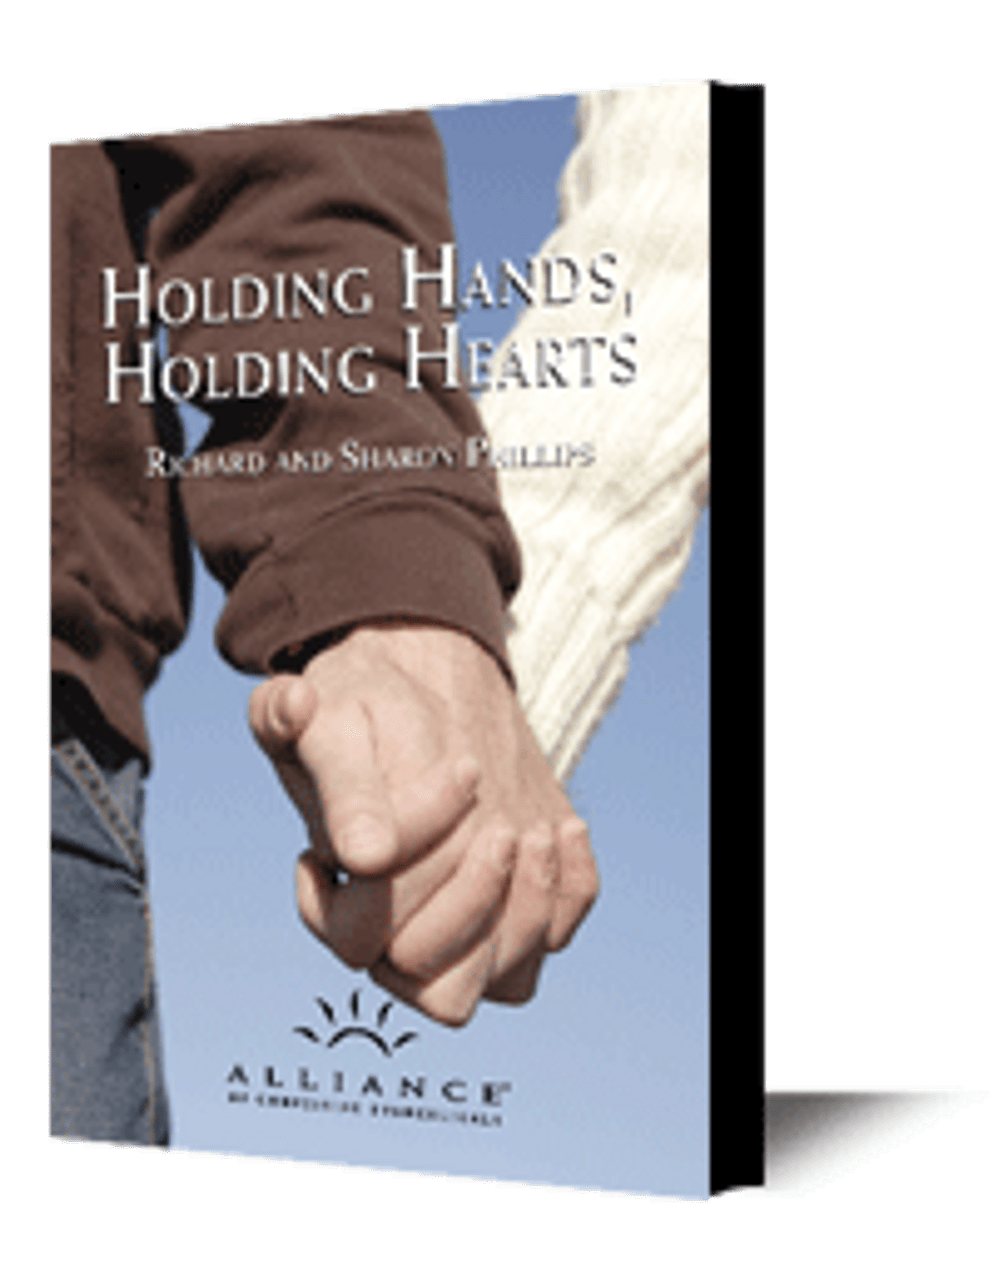 Holding Hands, Holding Hearts (CD Set)